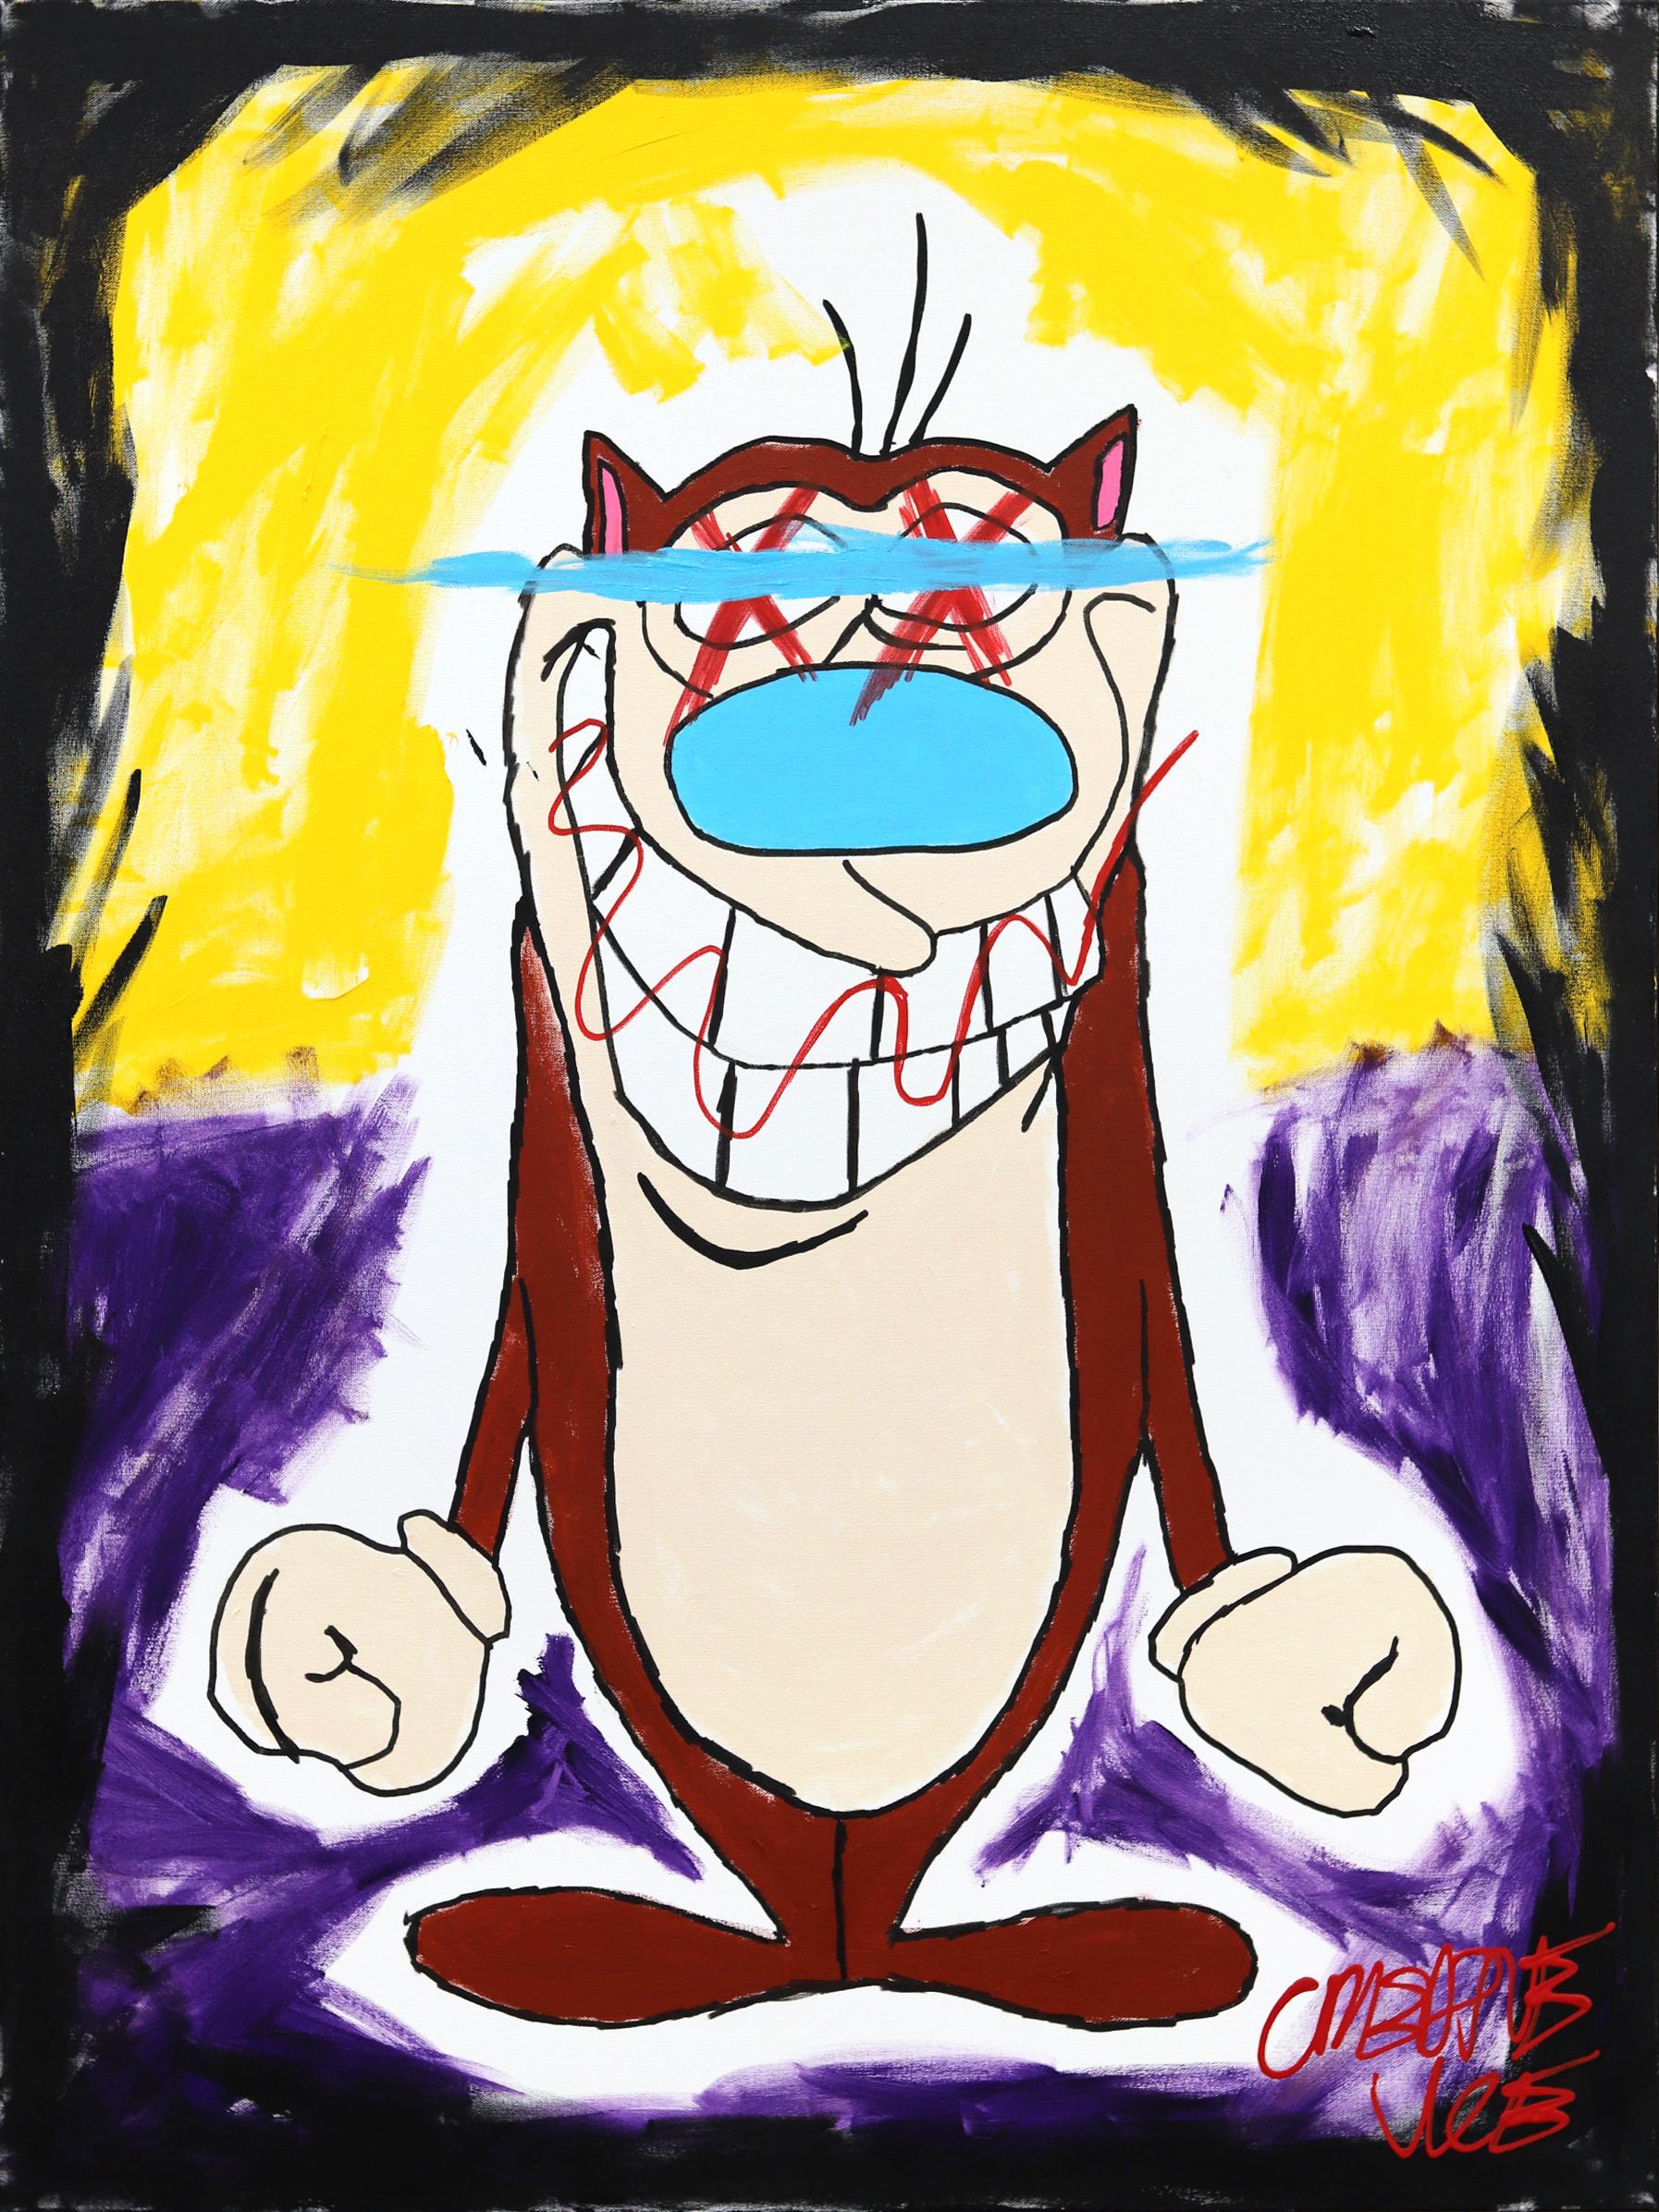 "Wubba Wubba" Pop Art inspired by Ren and Stimpy Colorful Cartoon Character